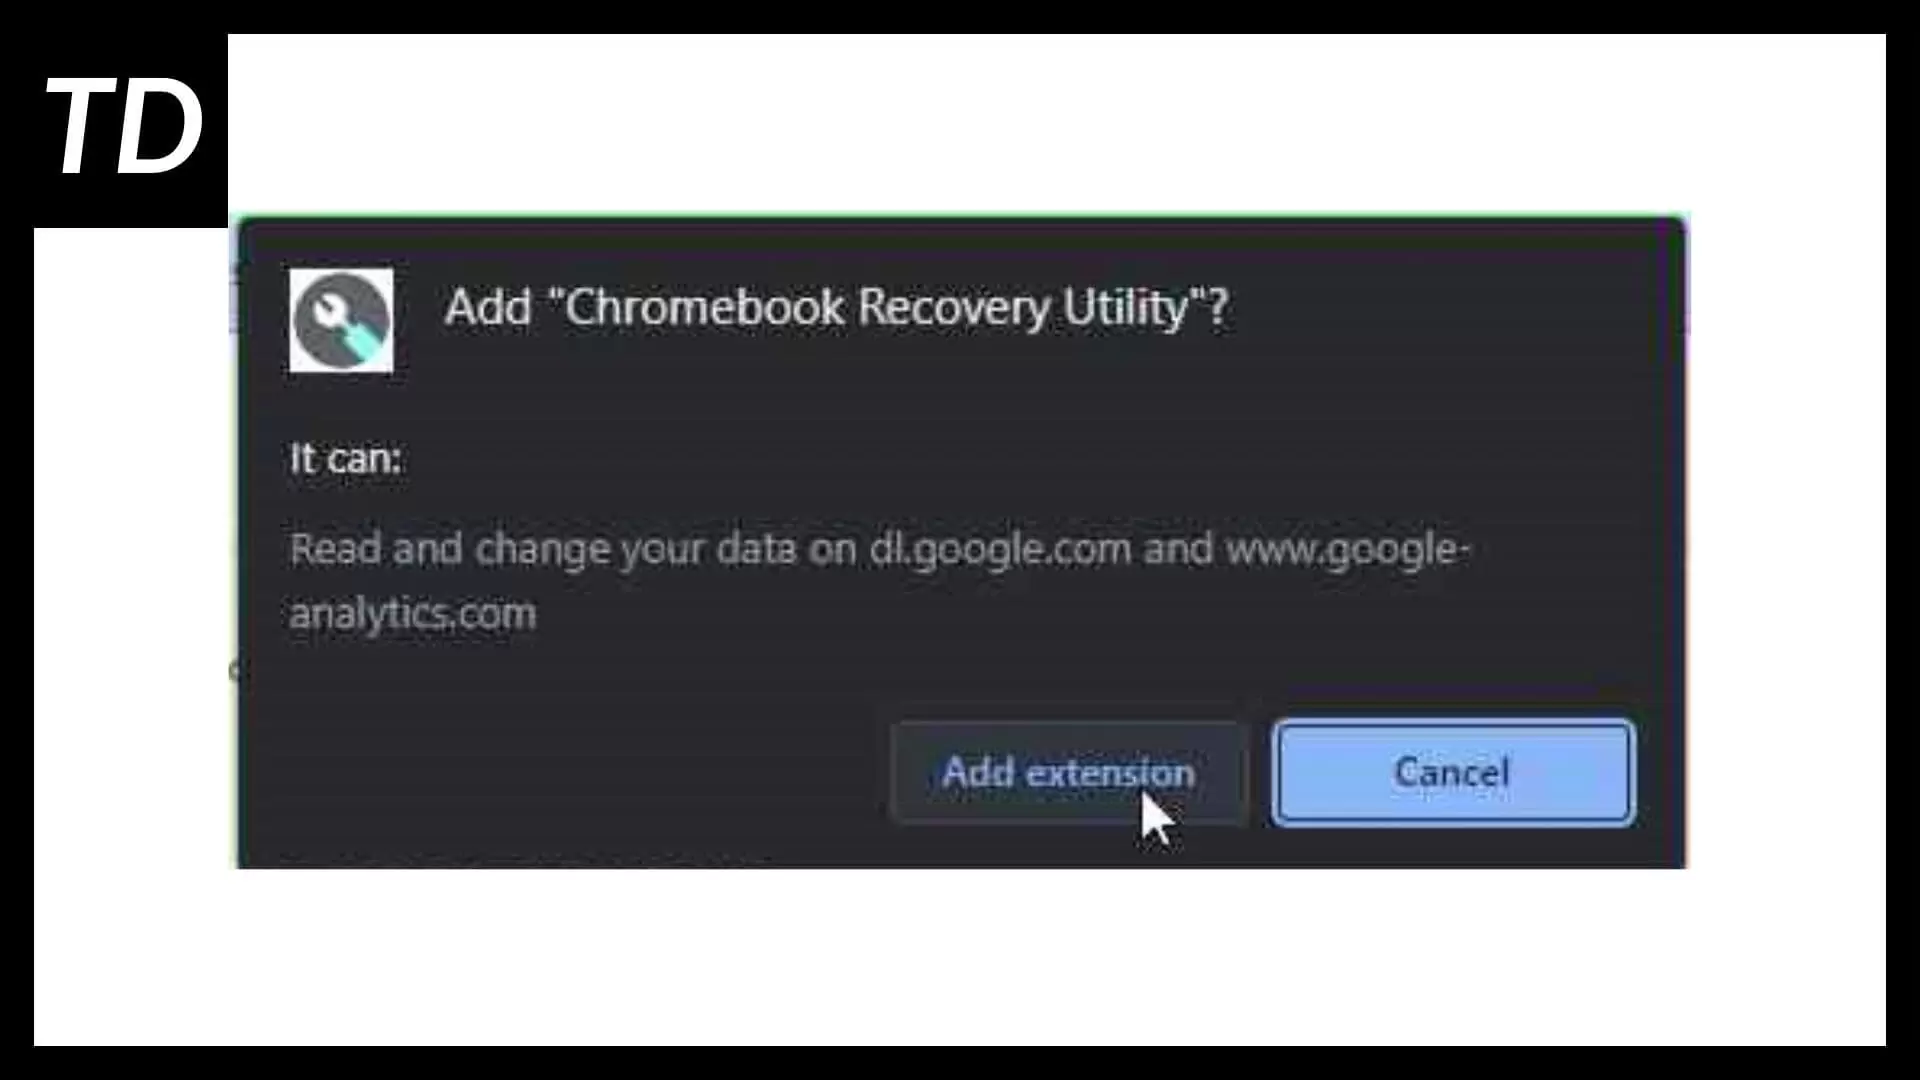 Chrome prompt to install extension